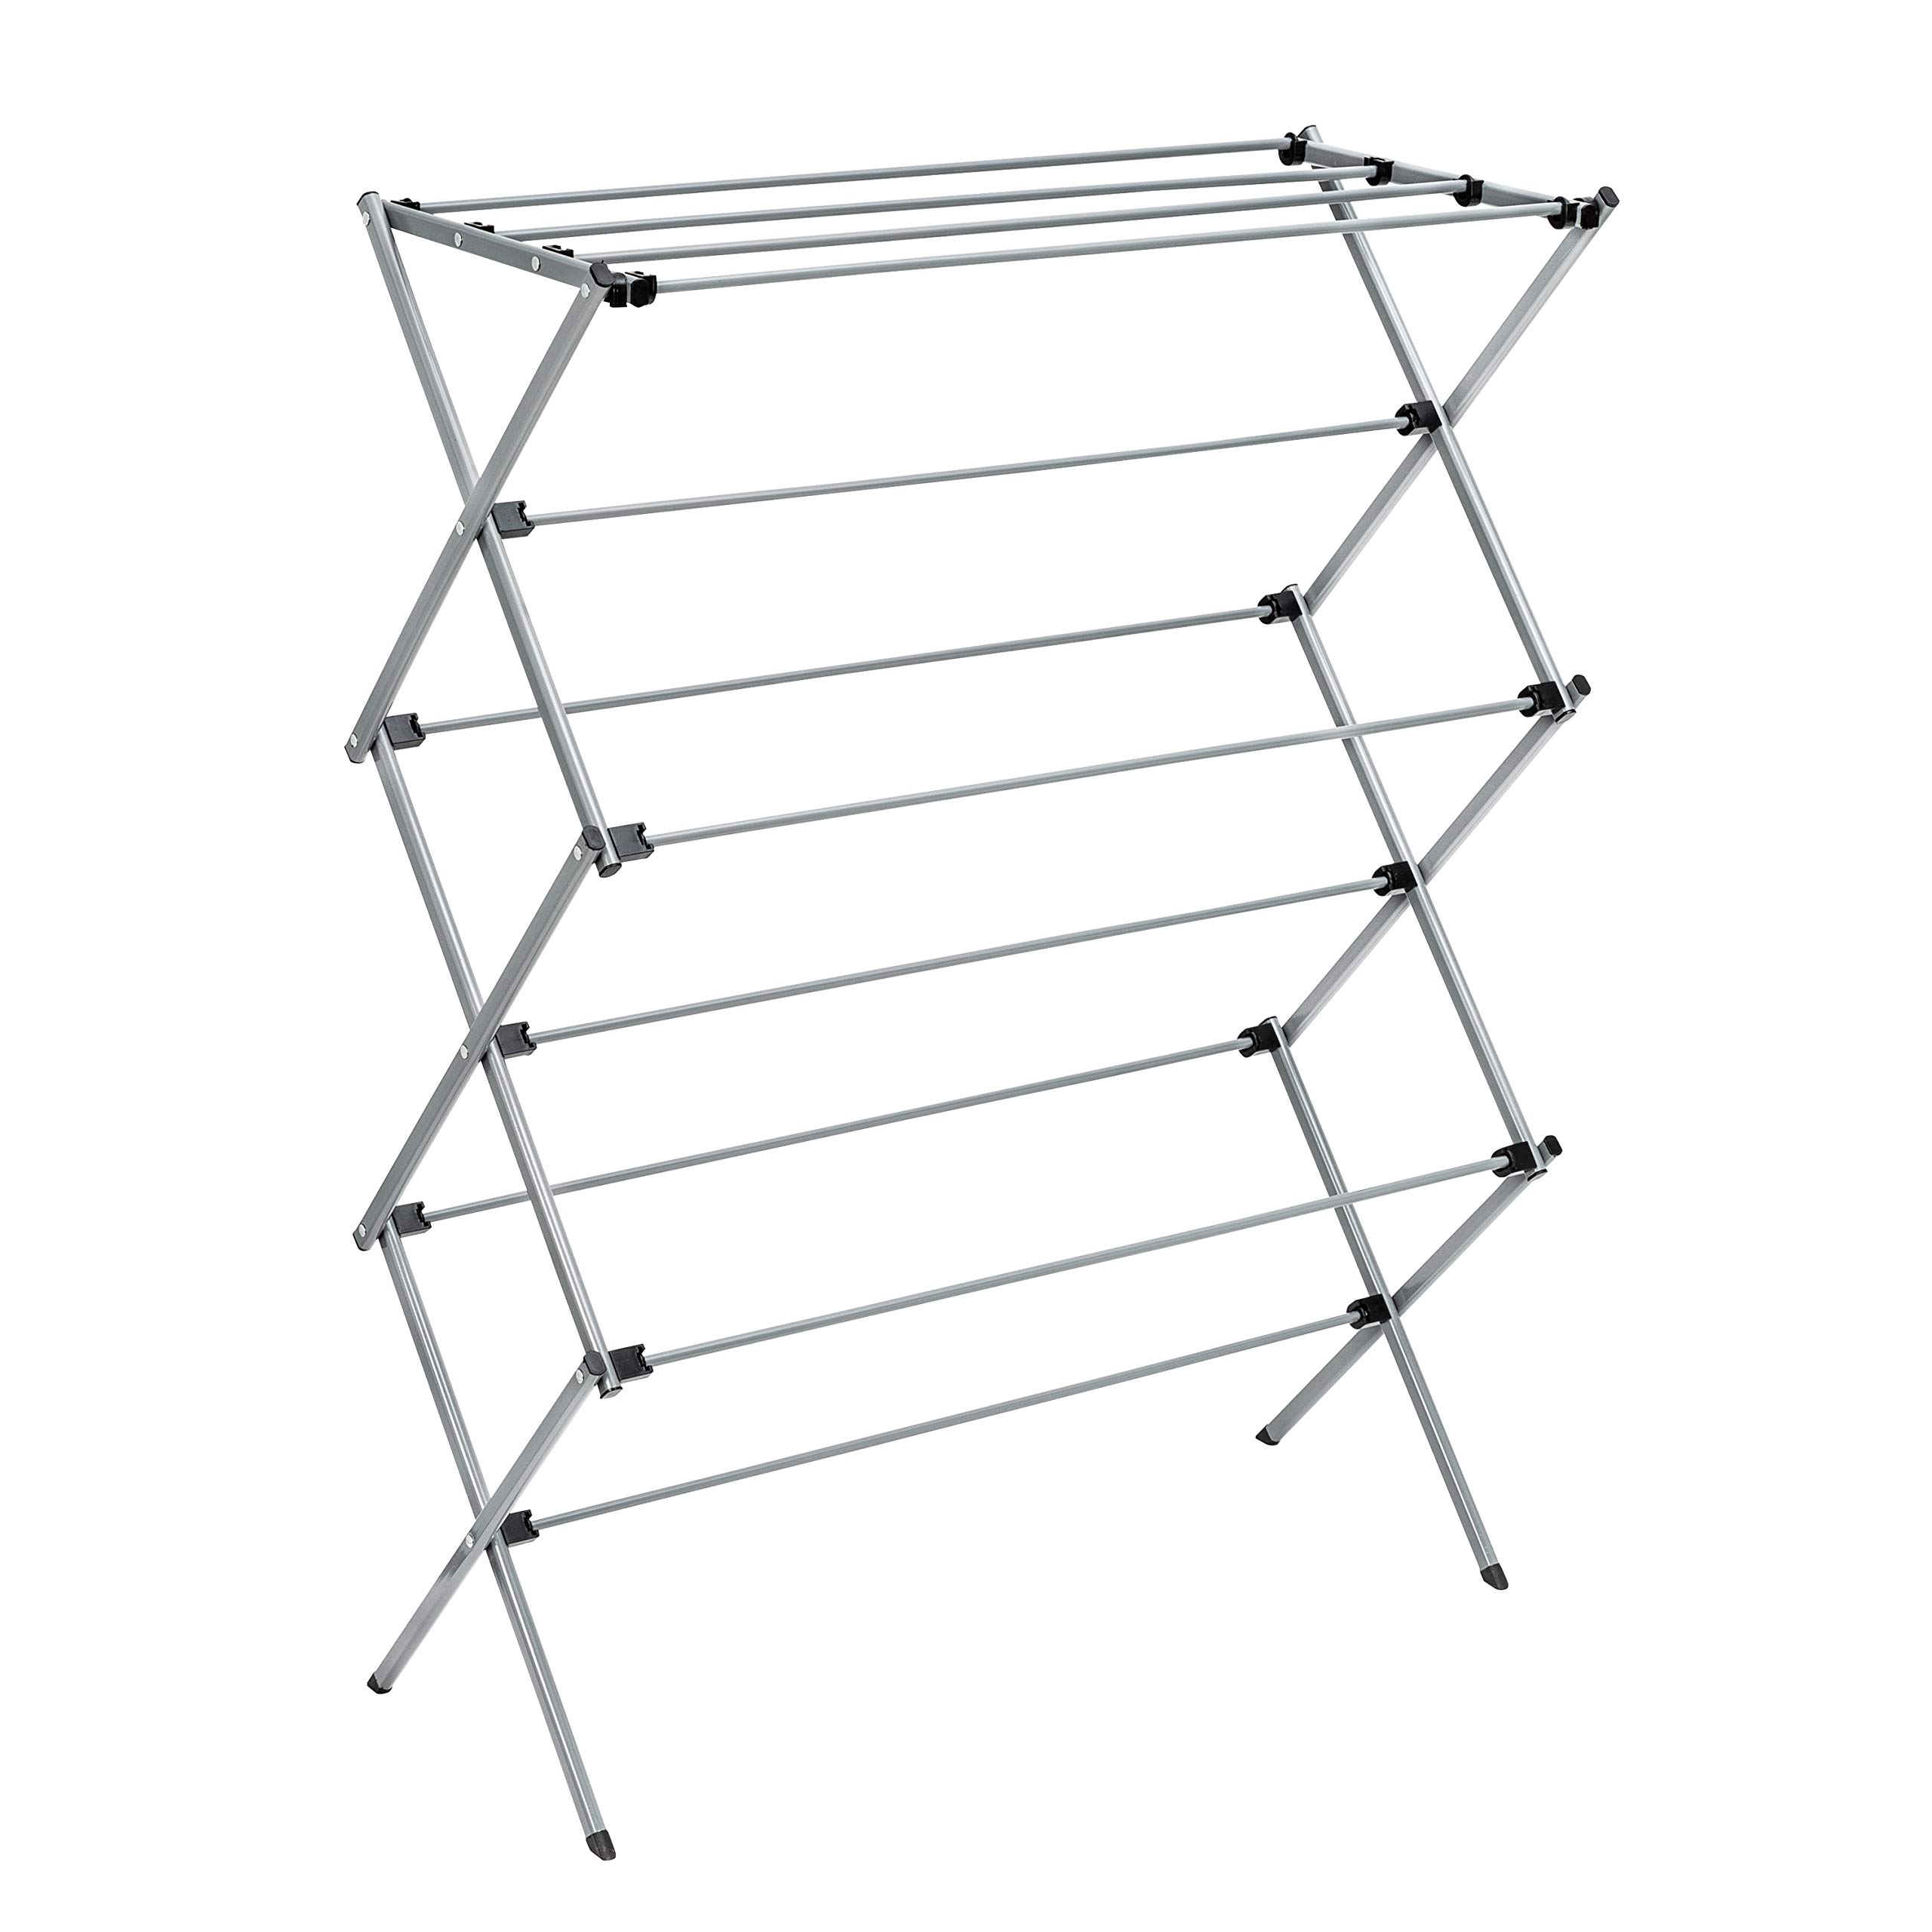 Honey-Can-Do Oversize Collapsible Clothes Drying Rack DRY-09066 Silver, 50 lbs